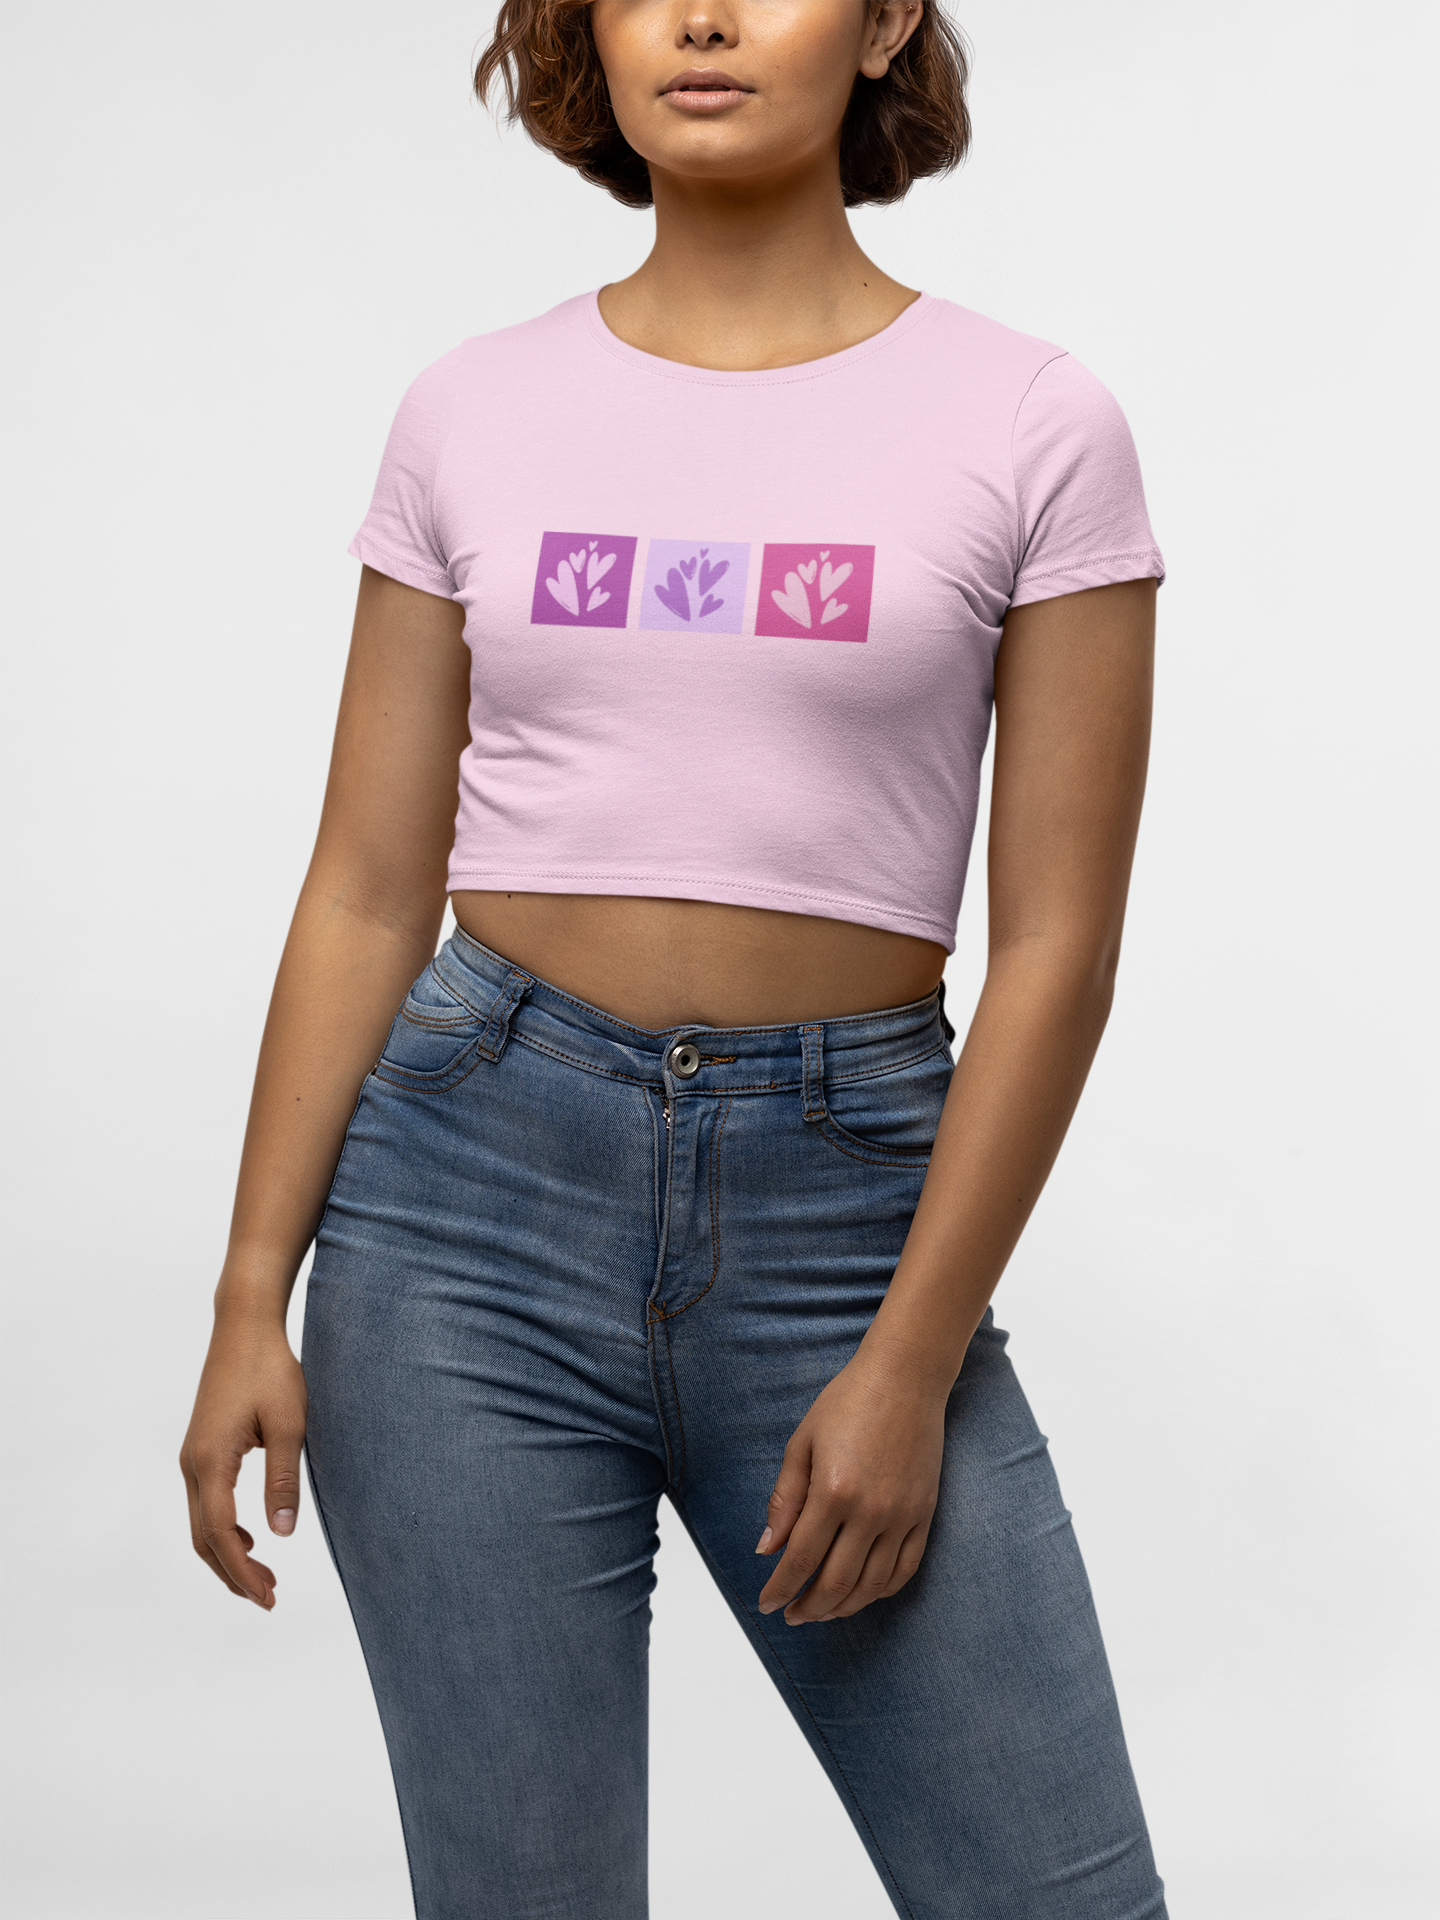 CROP TOP PINK: THREE HEARTS IN A BOX